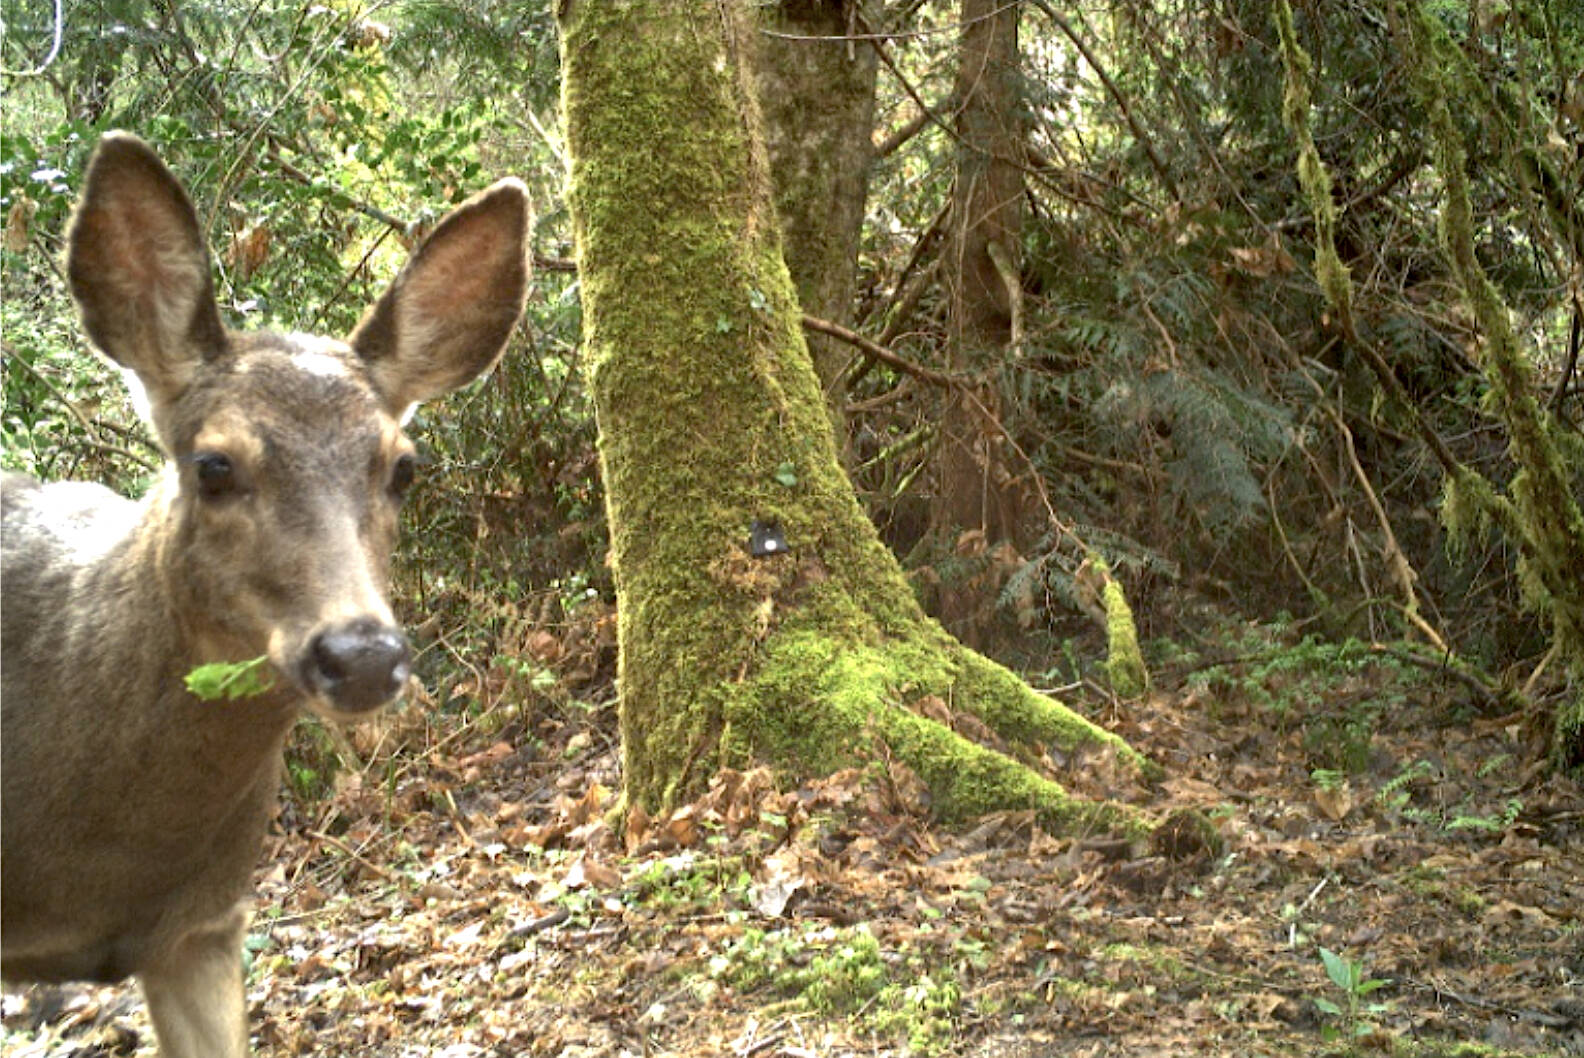 A deer takes a selfie while eating in front of a wildlife camera. Bloedel Reserve courtesy photos